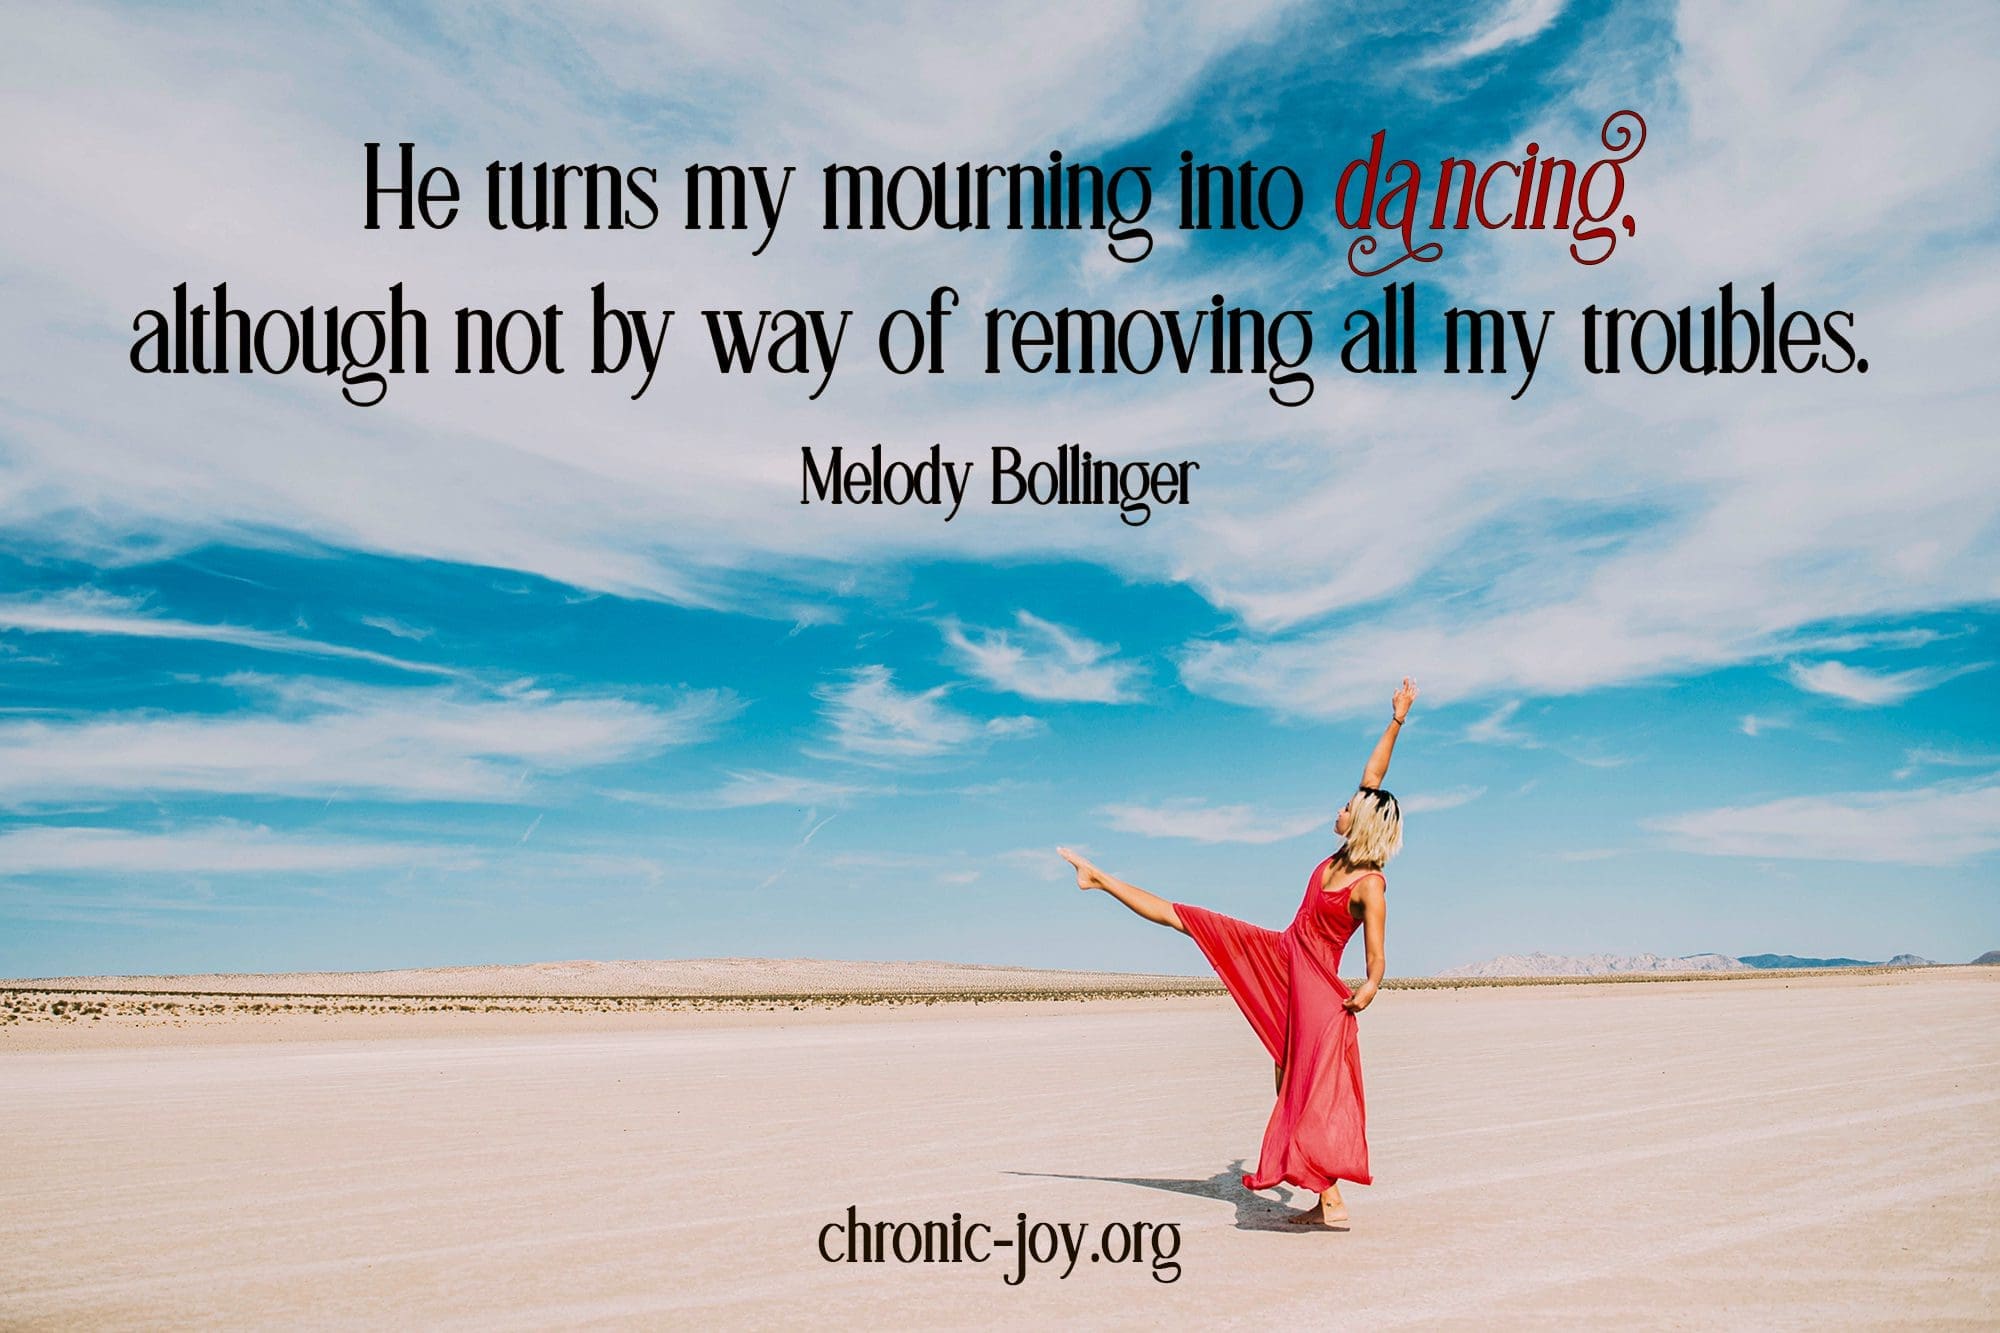 "He turns my mourning into dancing, although not by way of removing all my troubles." Melody Bollinger